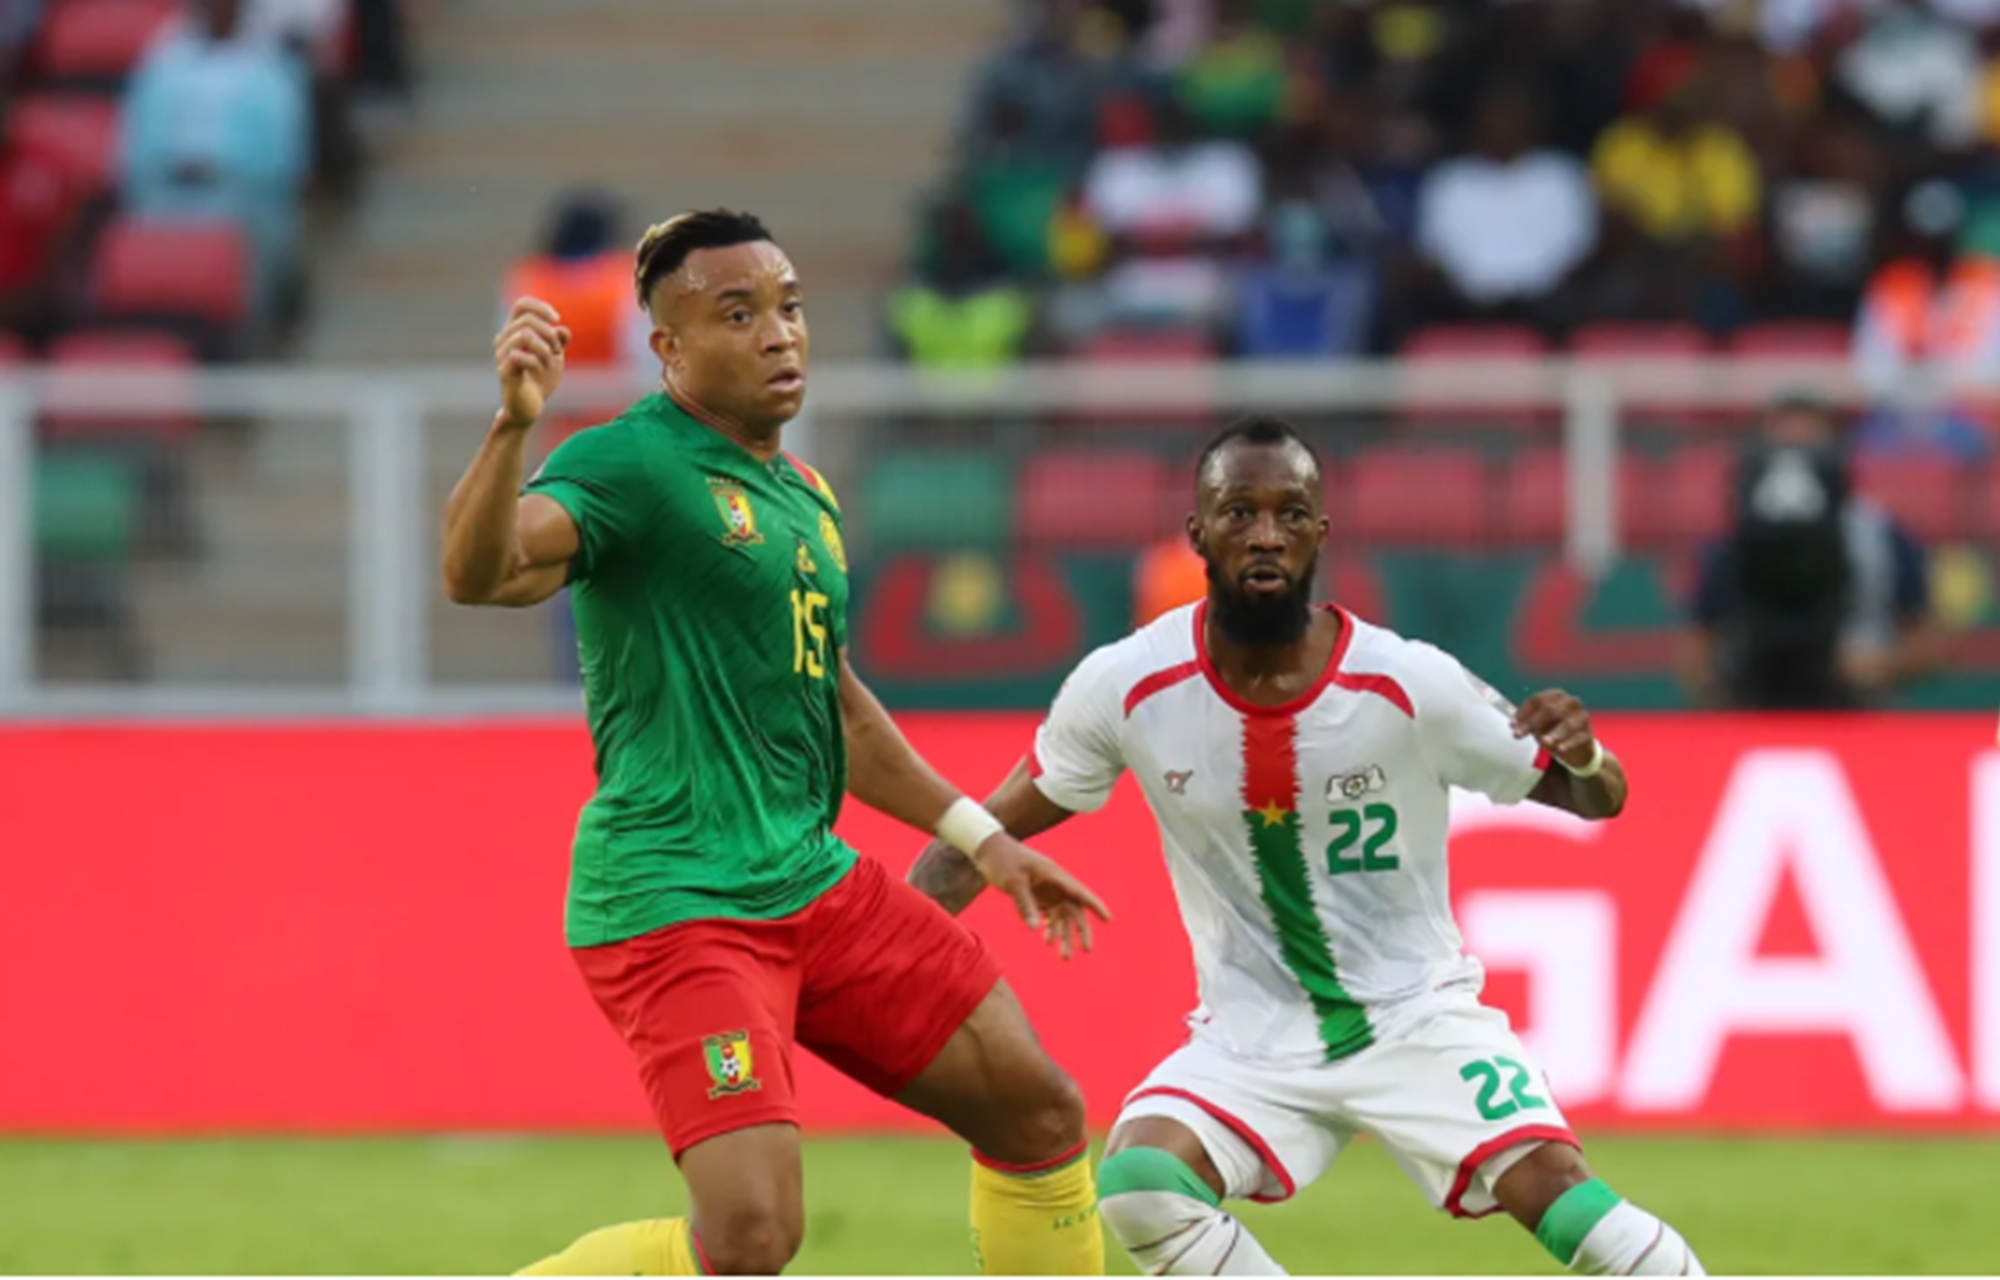 AFCON 2021 Opener: Vincent Aboubakar guides Cameroon to beat Burkina Faso